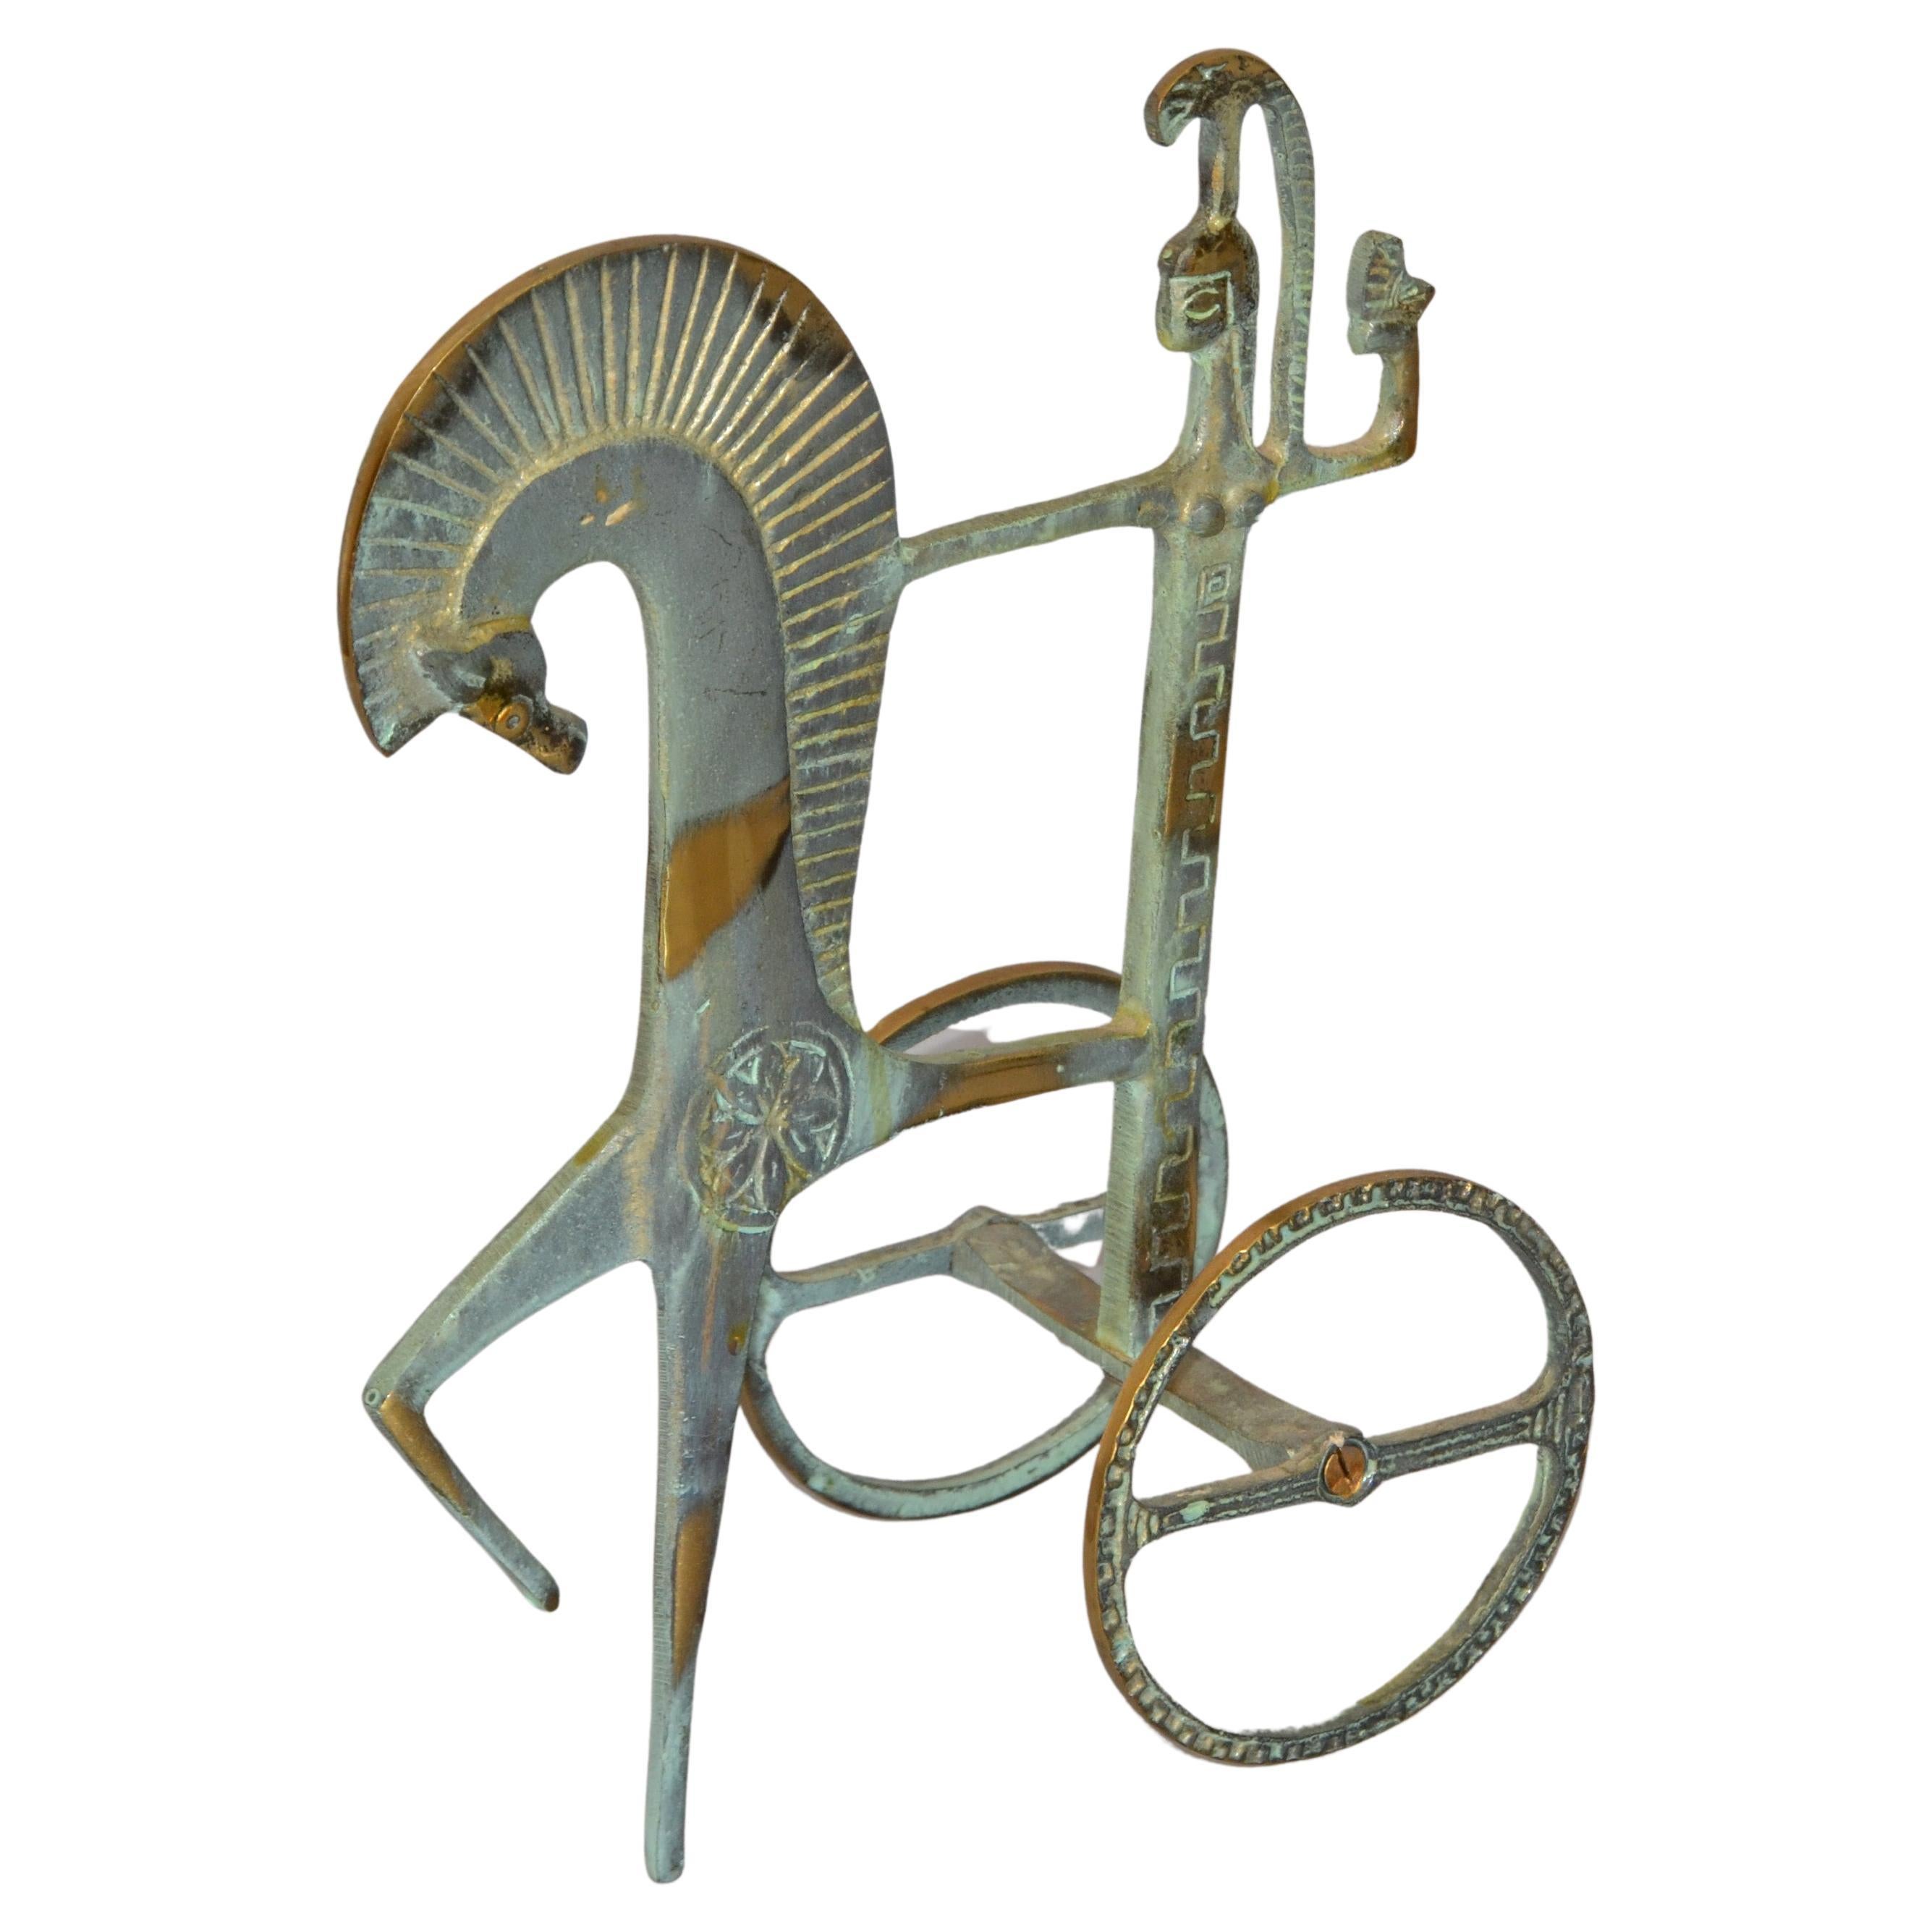 This is a bronze sculpture, which may have been done by Frederic Weinberg for Raymor.
It is an incredibly stylized Roman Chariot and has a patina finish. Italian-made and great for any Mid-Century Modern interior.
It looks like the work of